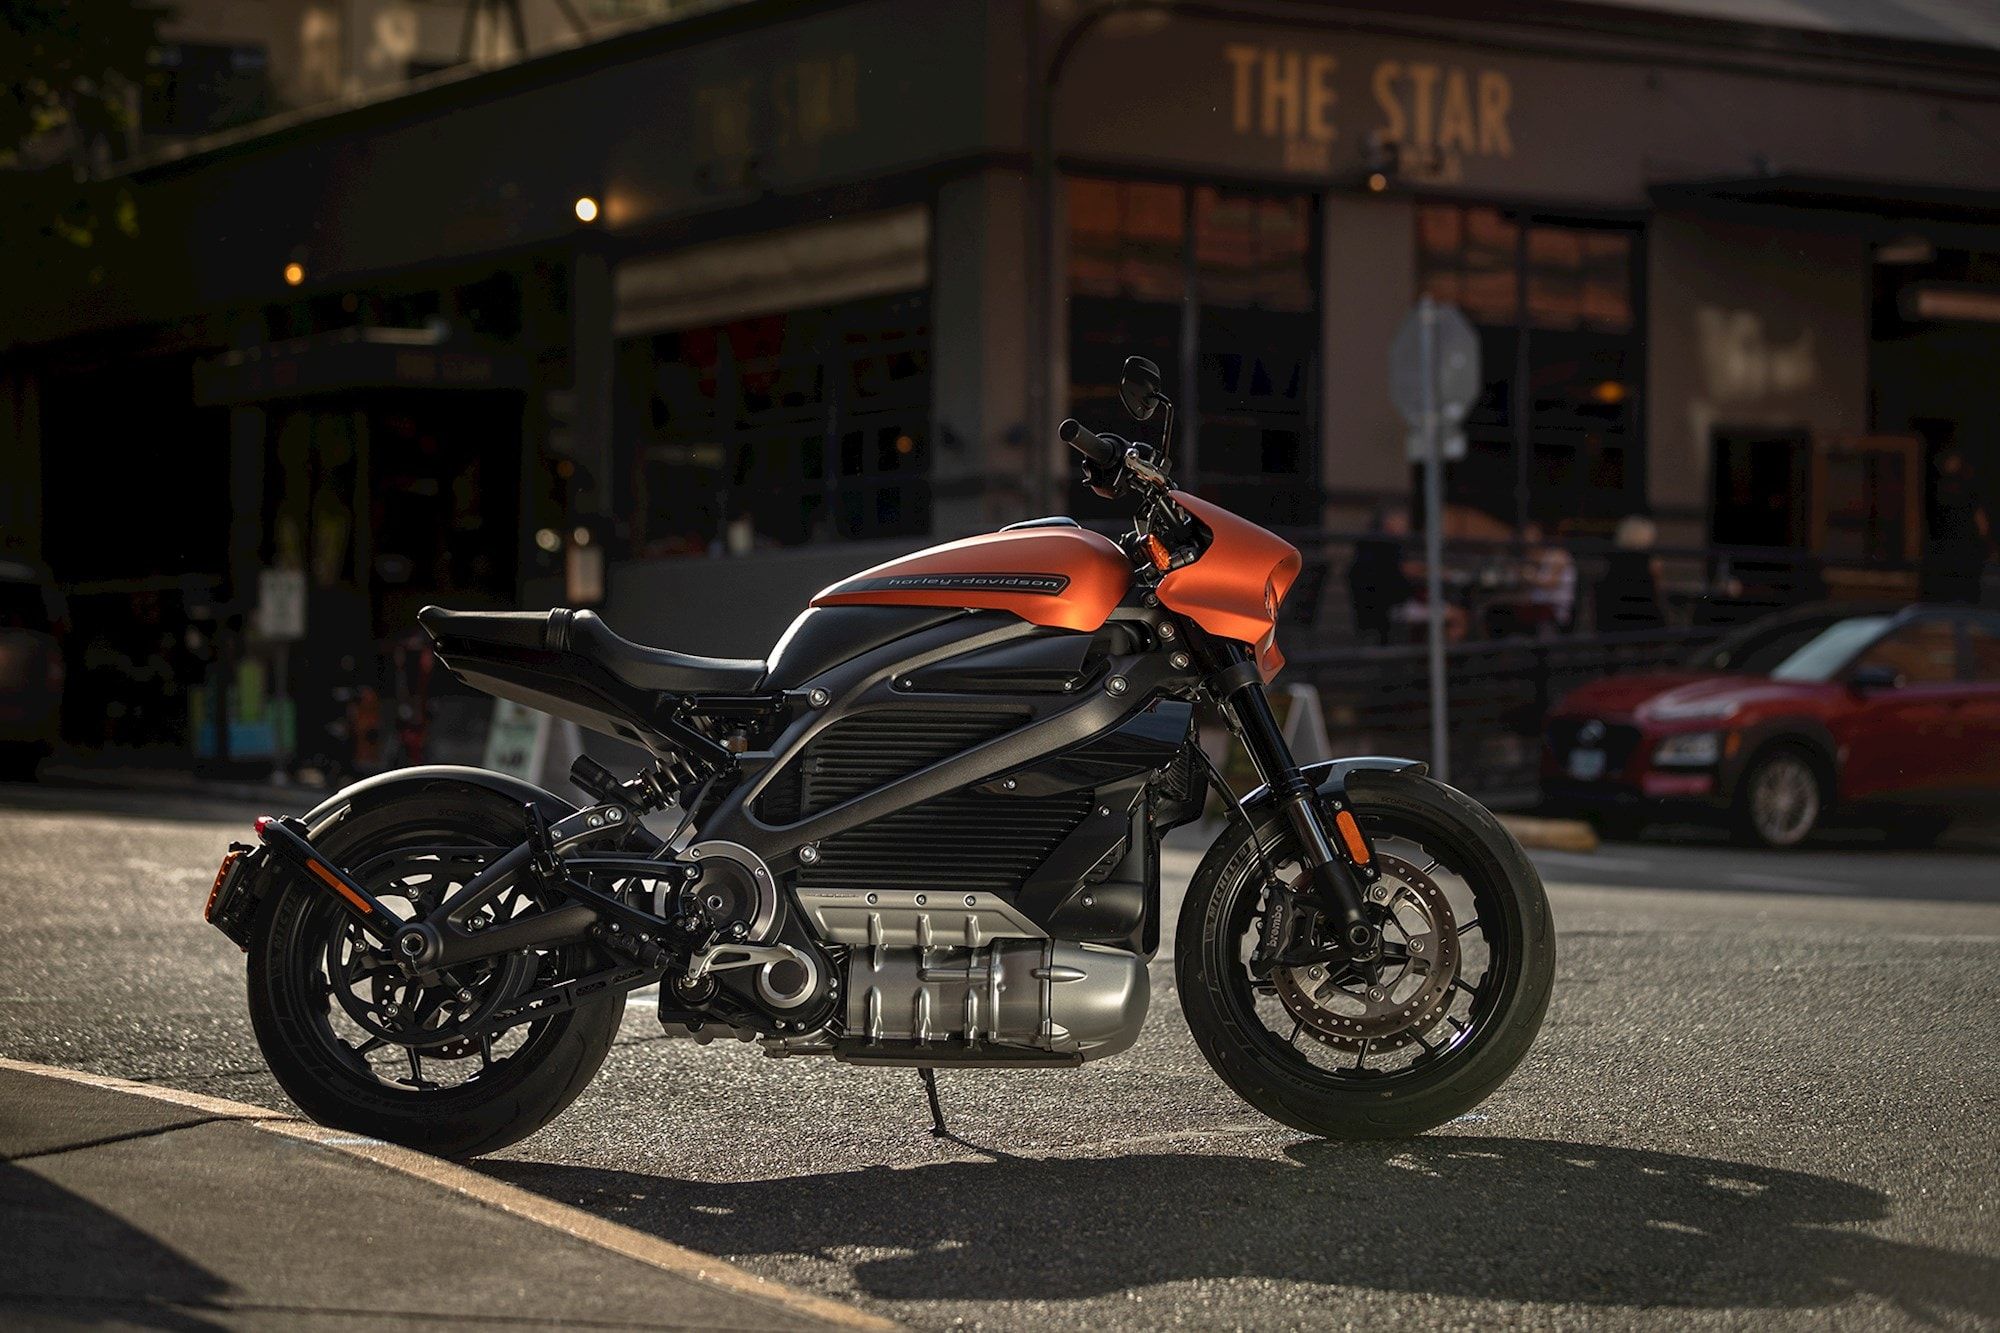 Harley Davidson’s first-ever electric bike, the LiveWire, is now in India